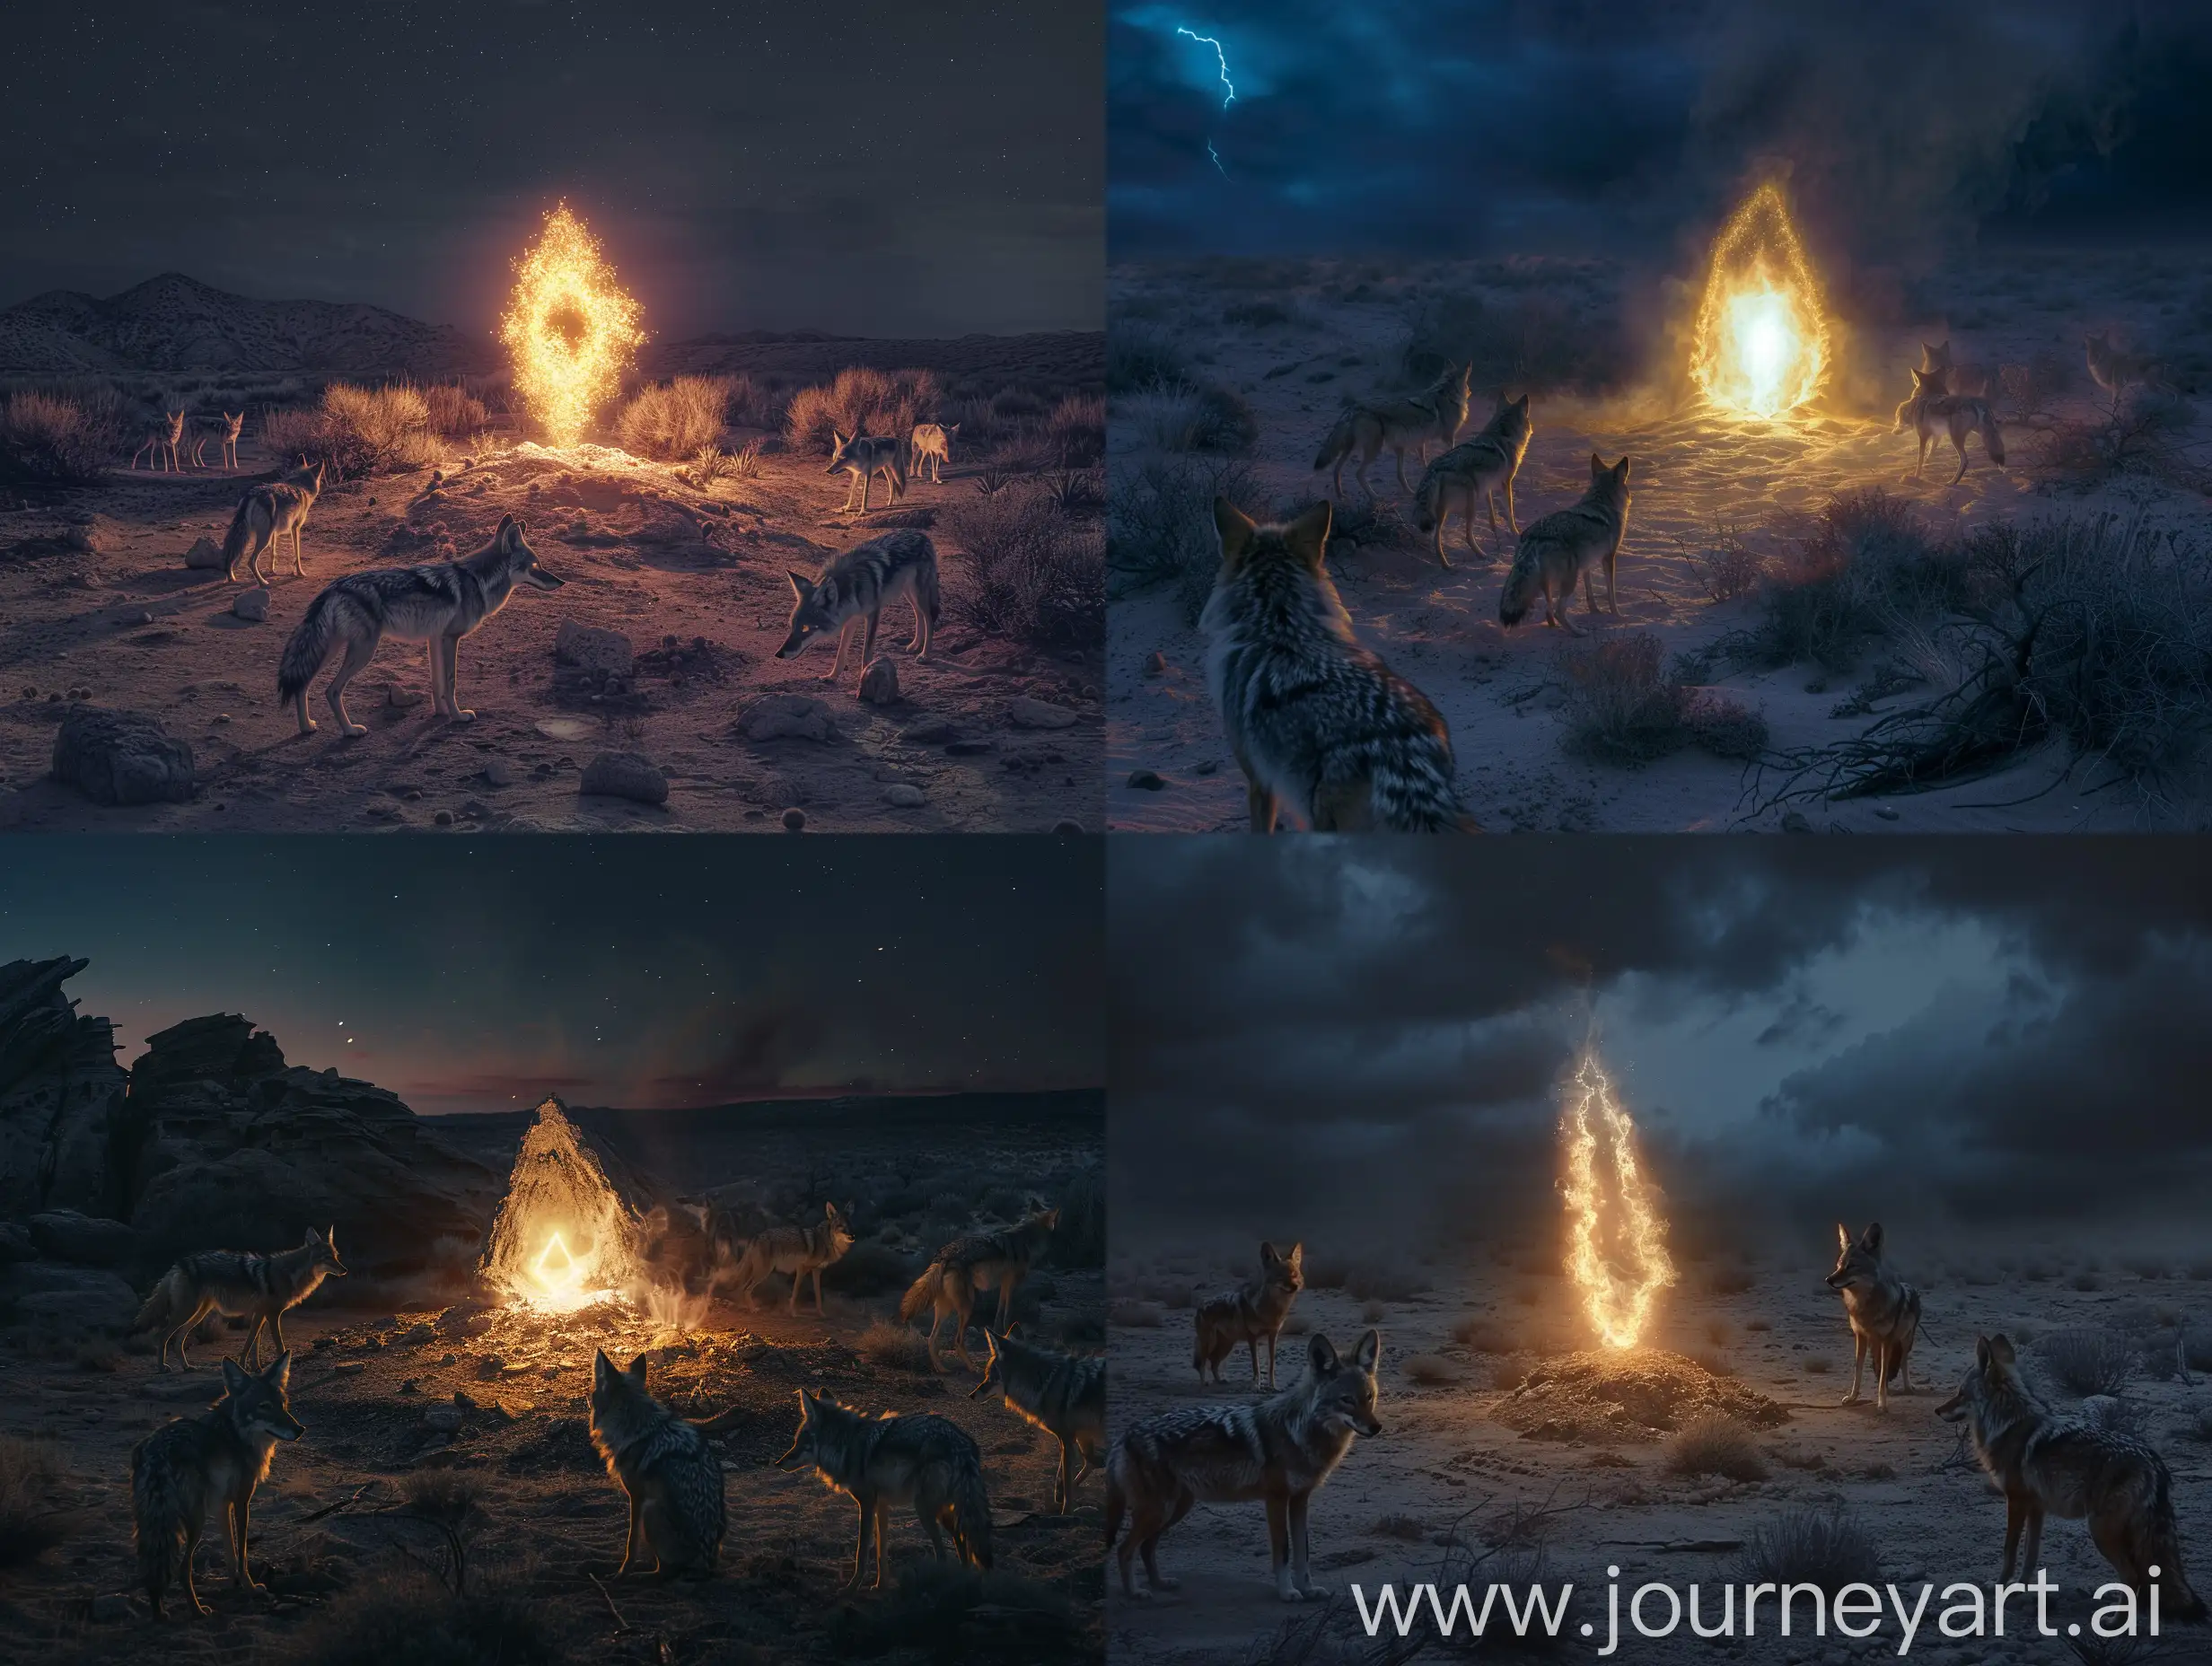 desert landscape at night with glowing shape coming out of the ground surrounded by pack of coyotes realistic lighting photograph raw moody symbol ar Image